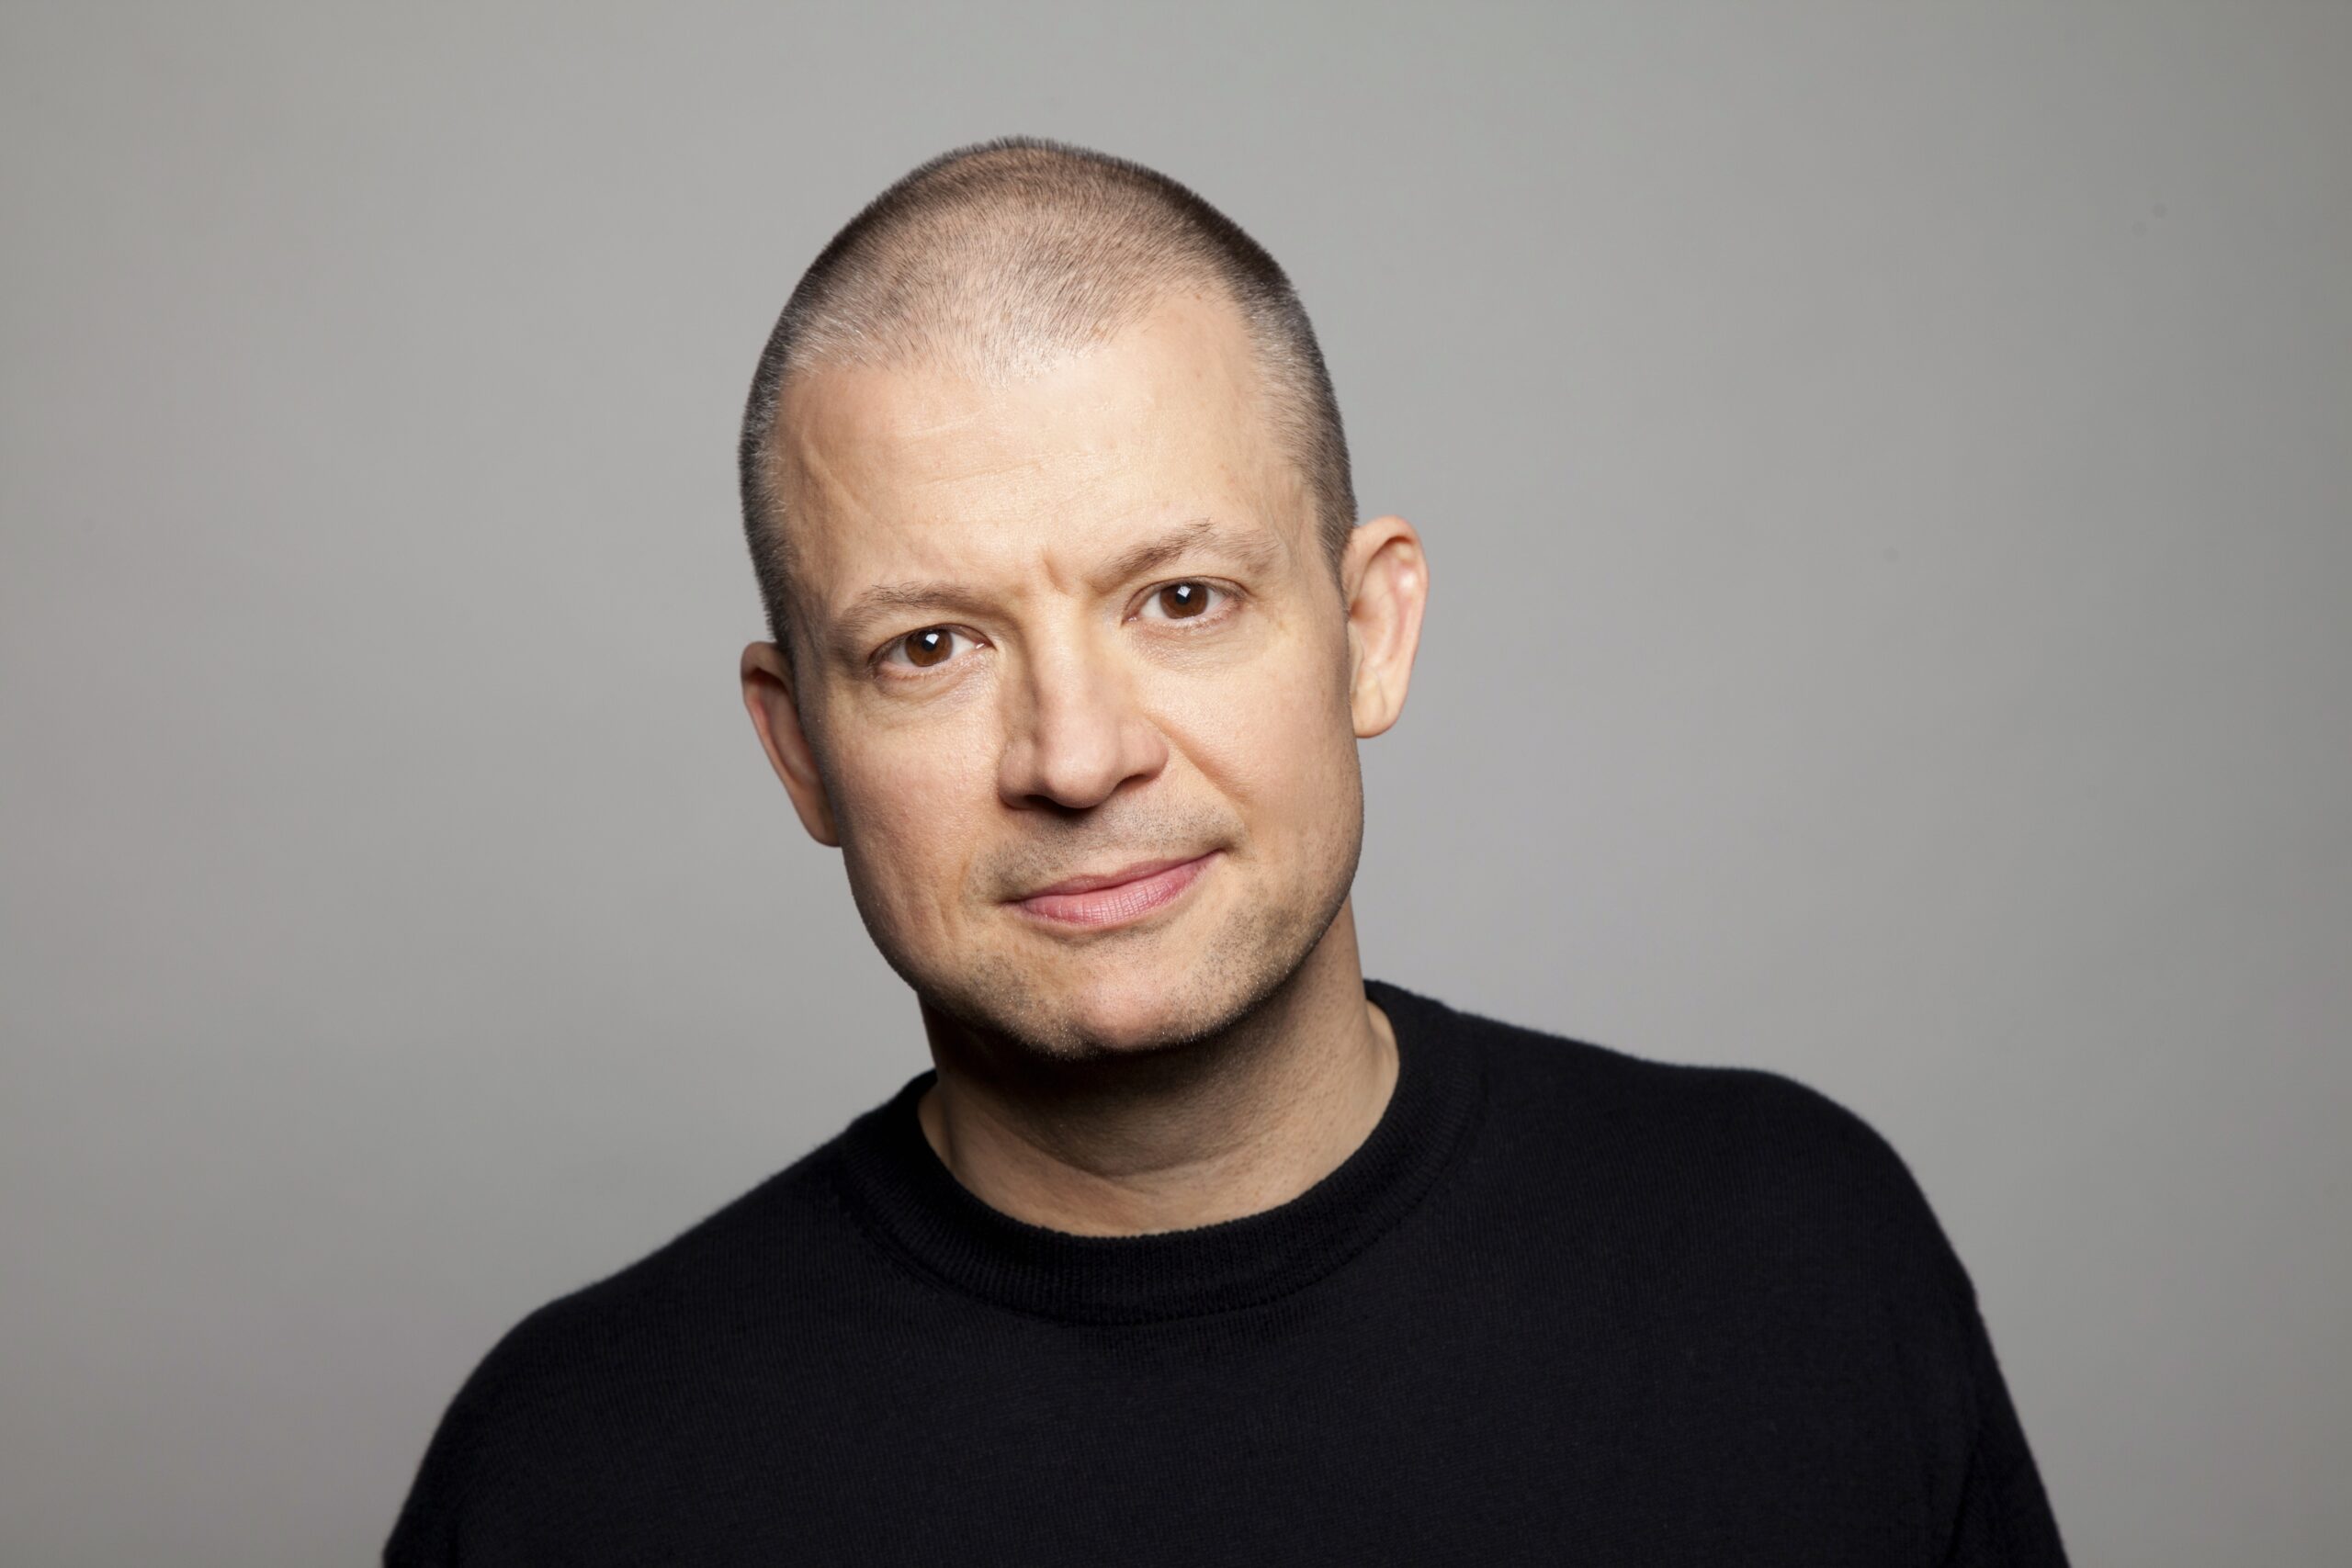 Who Is Jim Norton's Girlfriend? Here's What We Know!